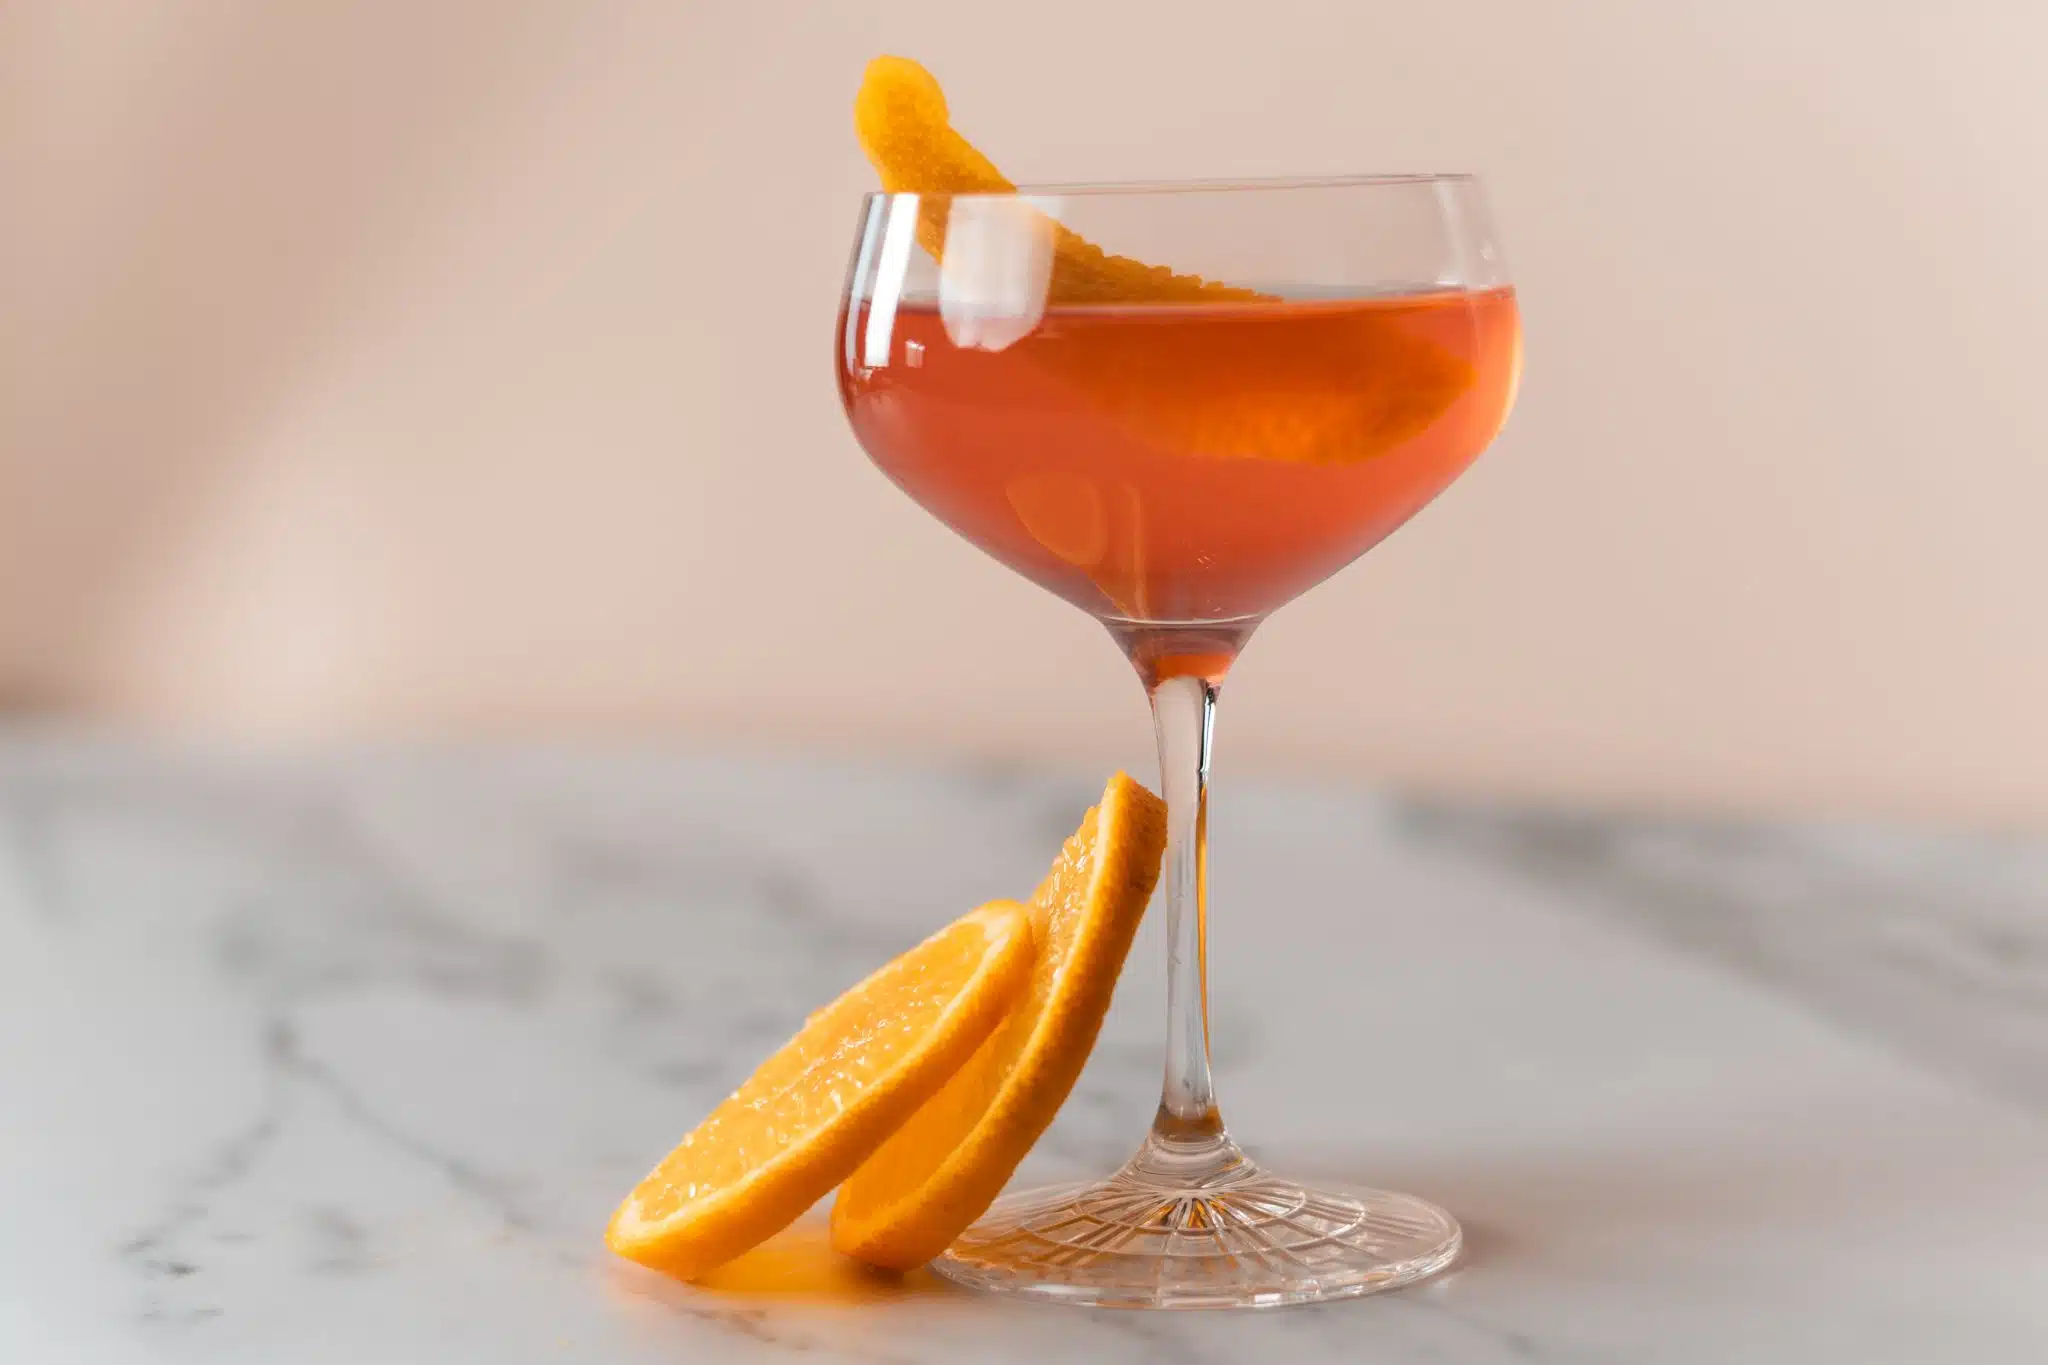 A side shot of a Cosmopolitan cocktail in a martini glass on a white marmol table with two orange slices on the side.